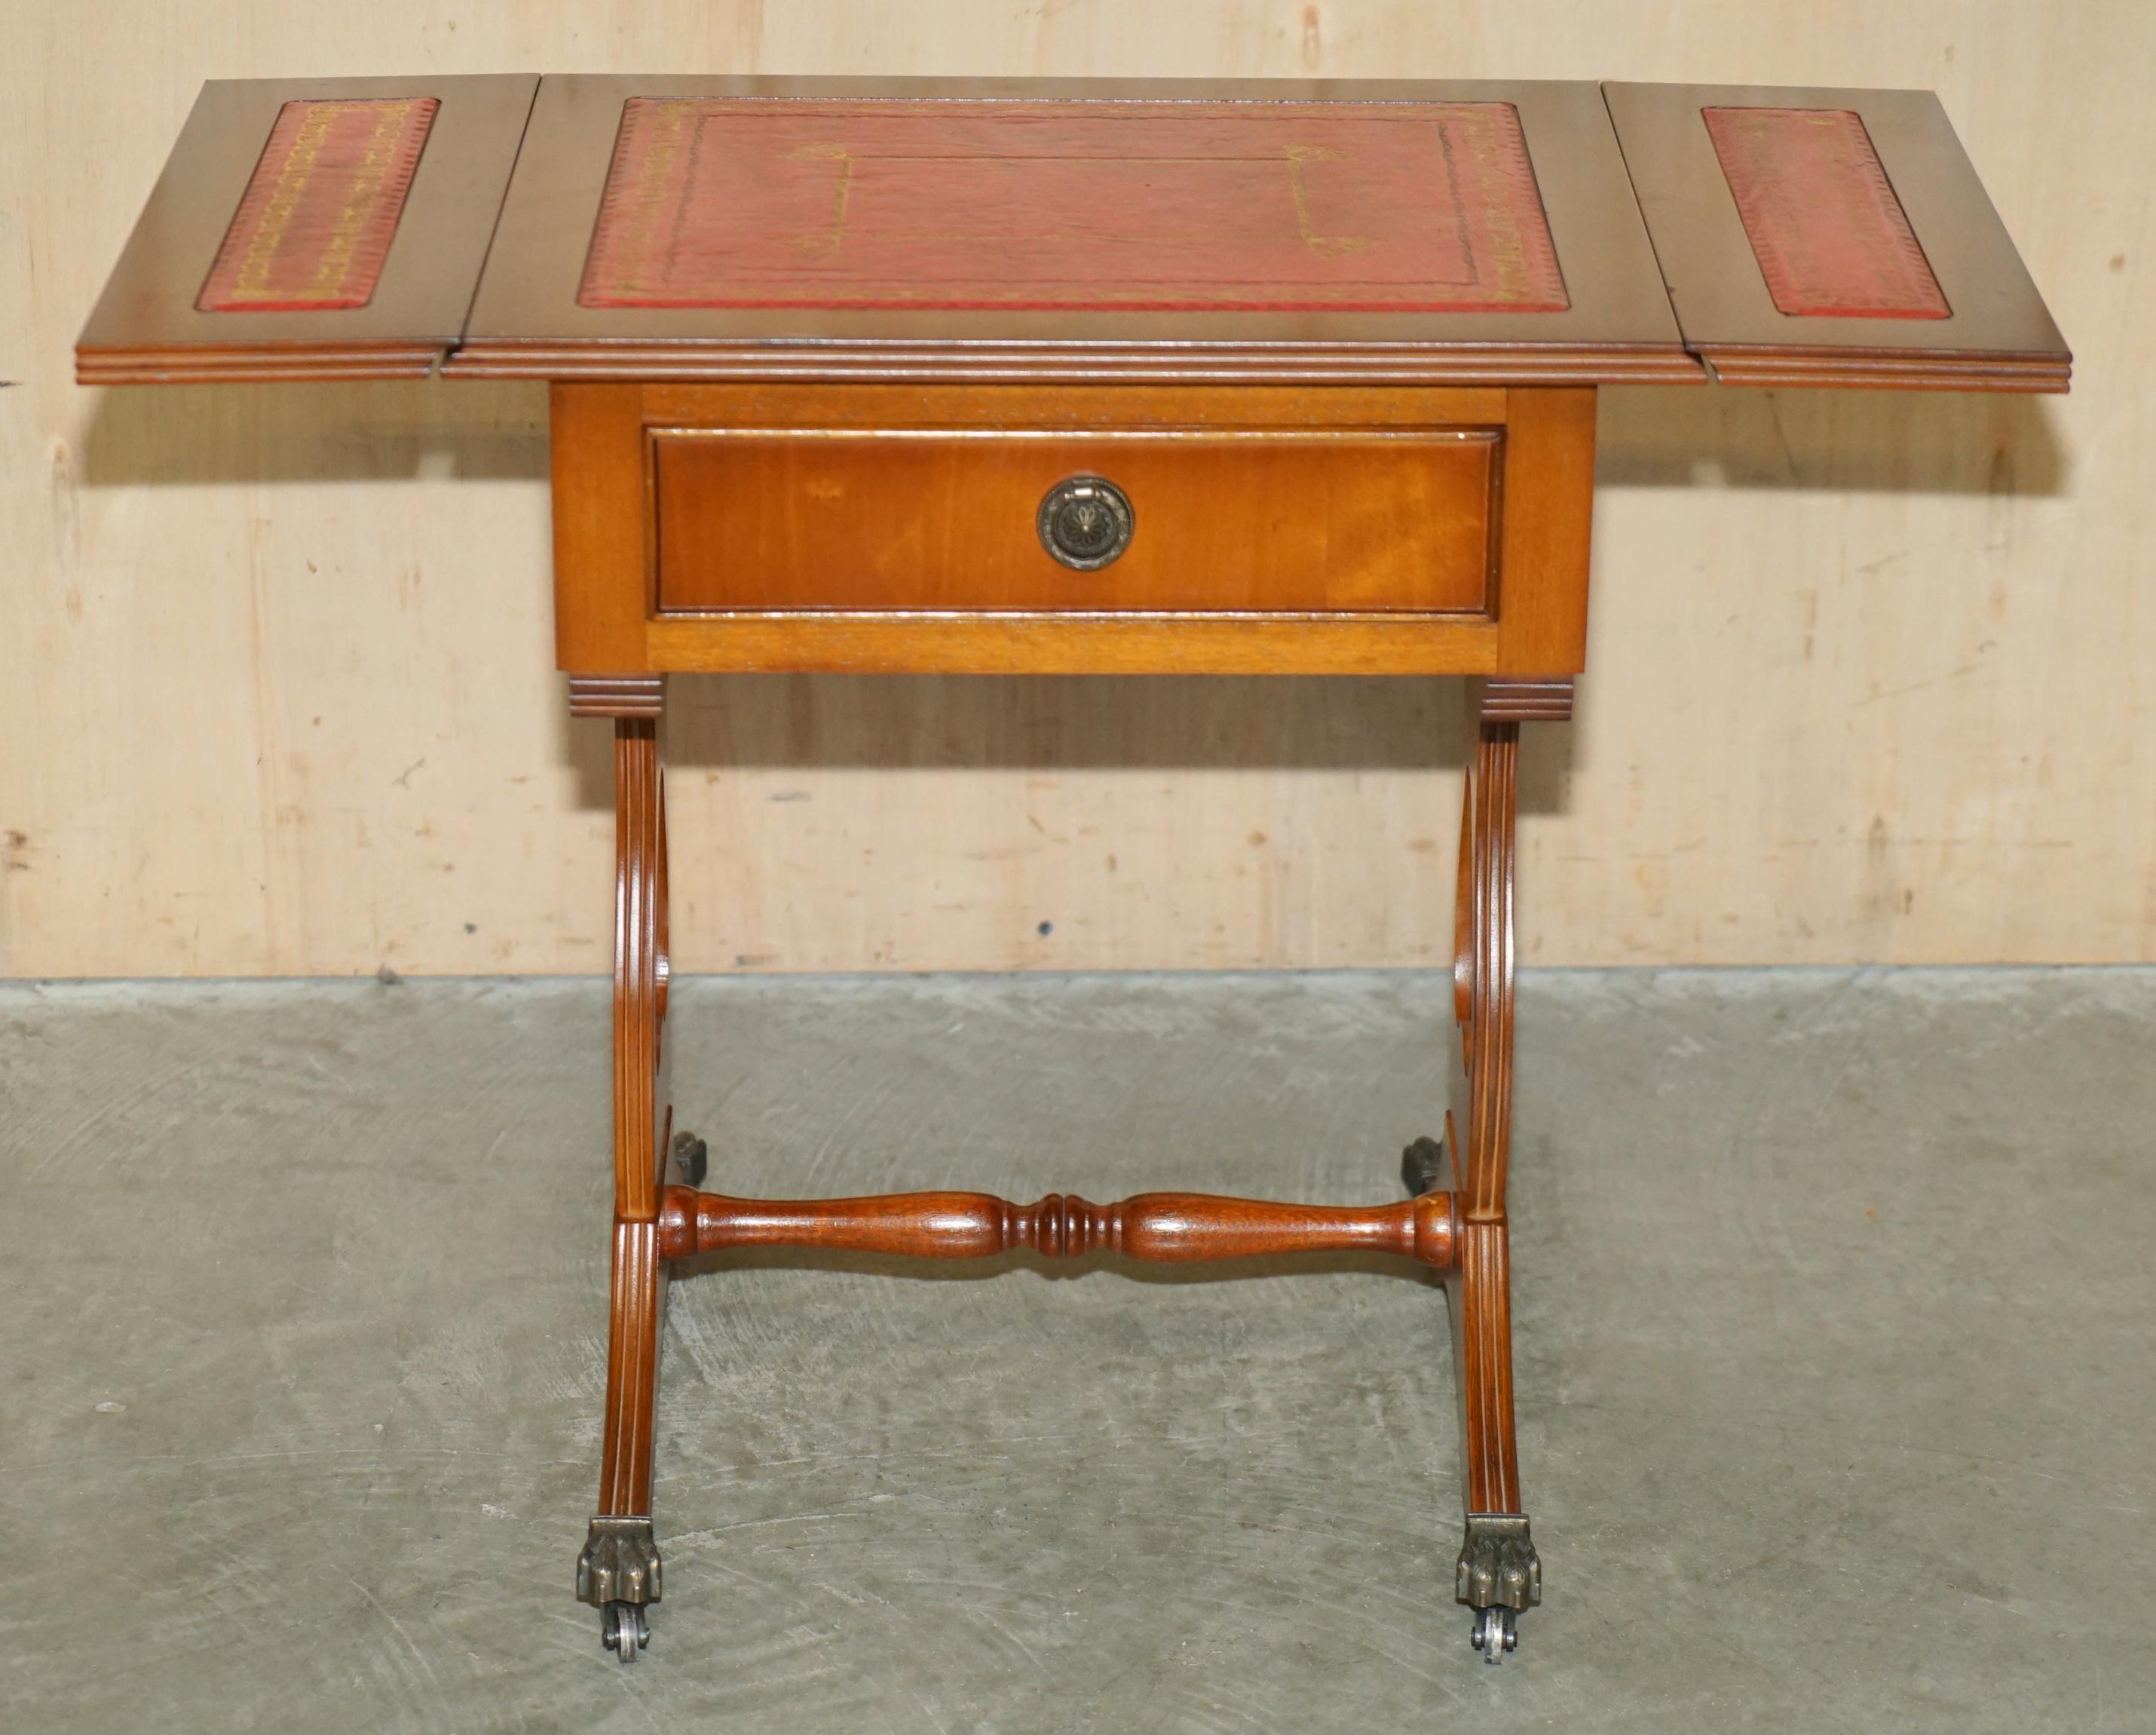 LOVELY ViNTAGE OXBLOOD LEATHER EXTENDING SIDE TABLE WITH GOLD LEAF INLAY For Sale 11